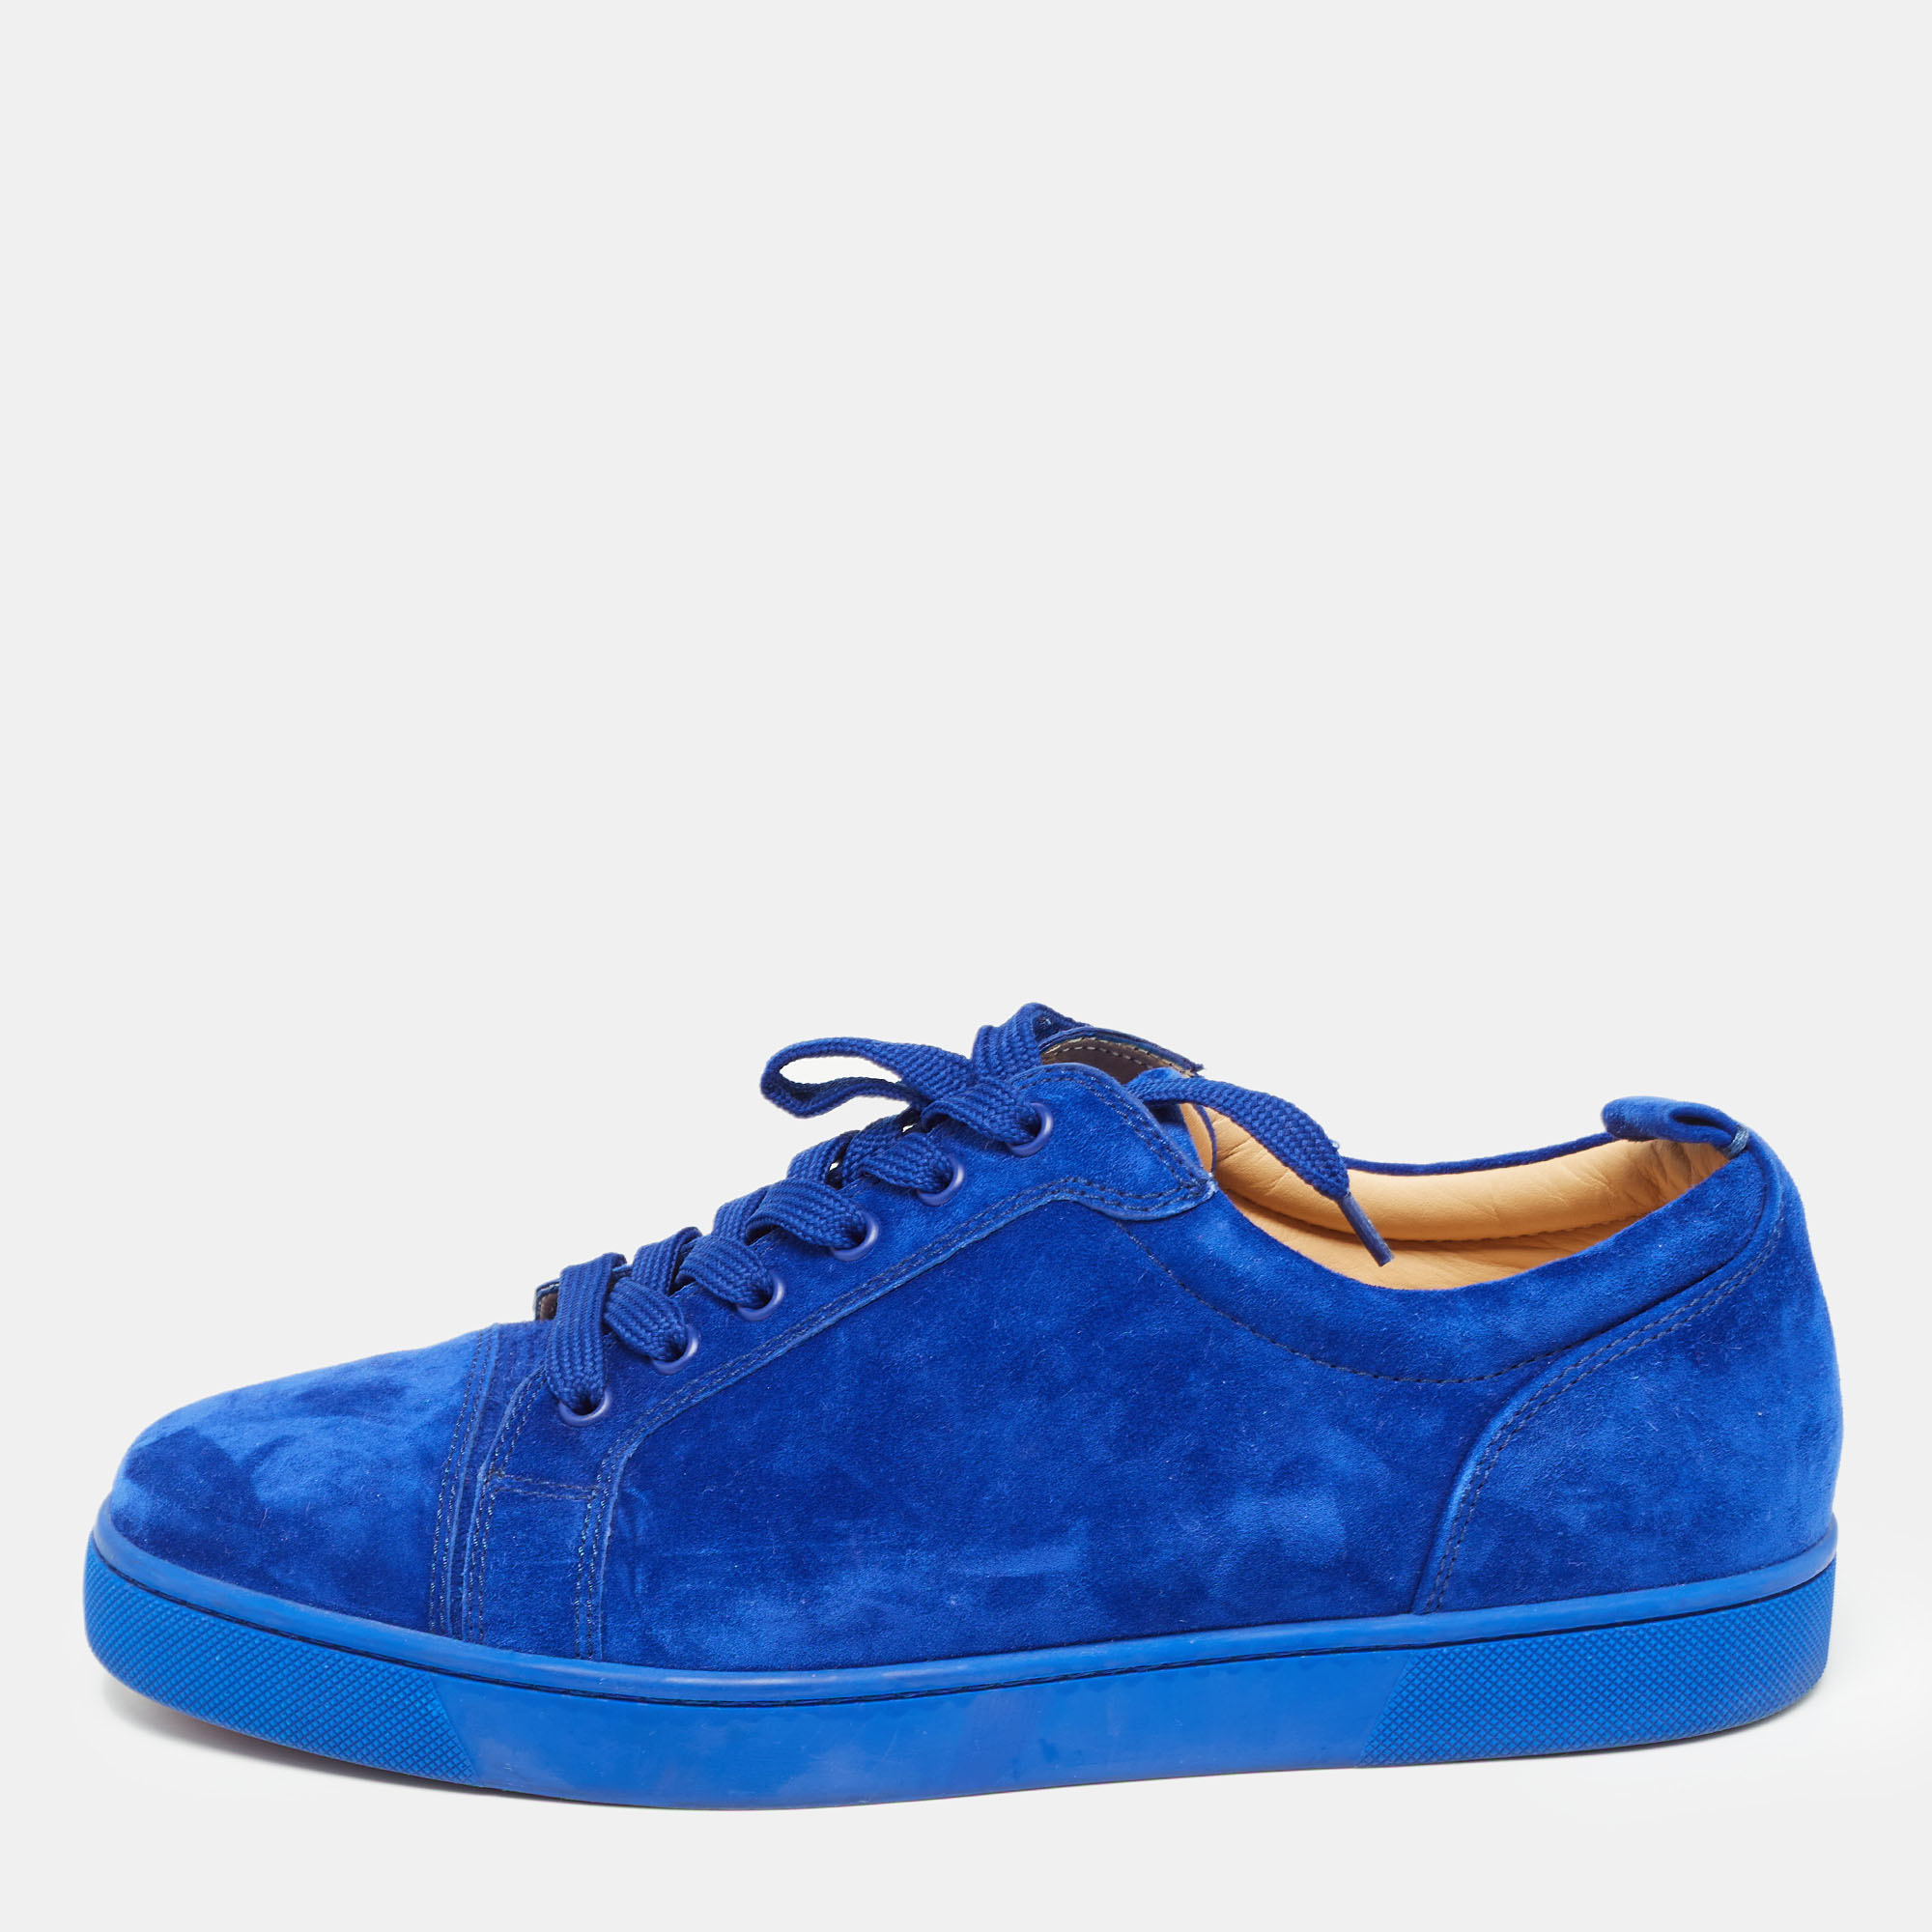 Christian louboutin blue suede leather low top sneakers size 42.5